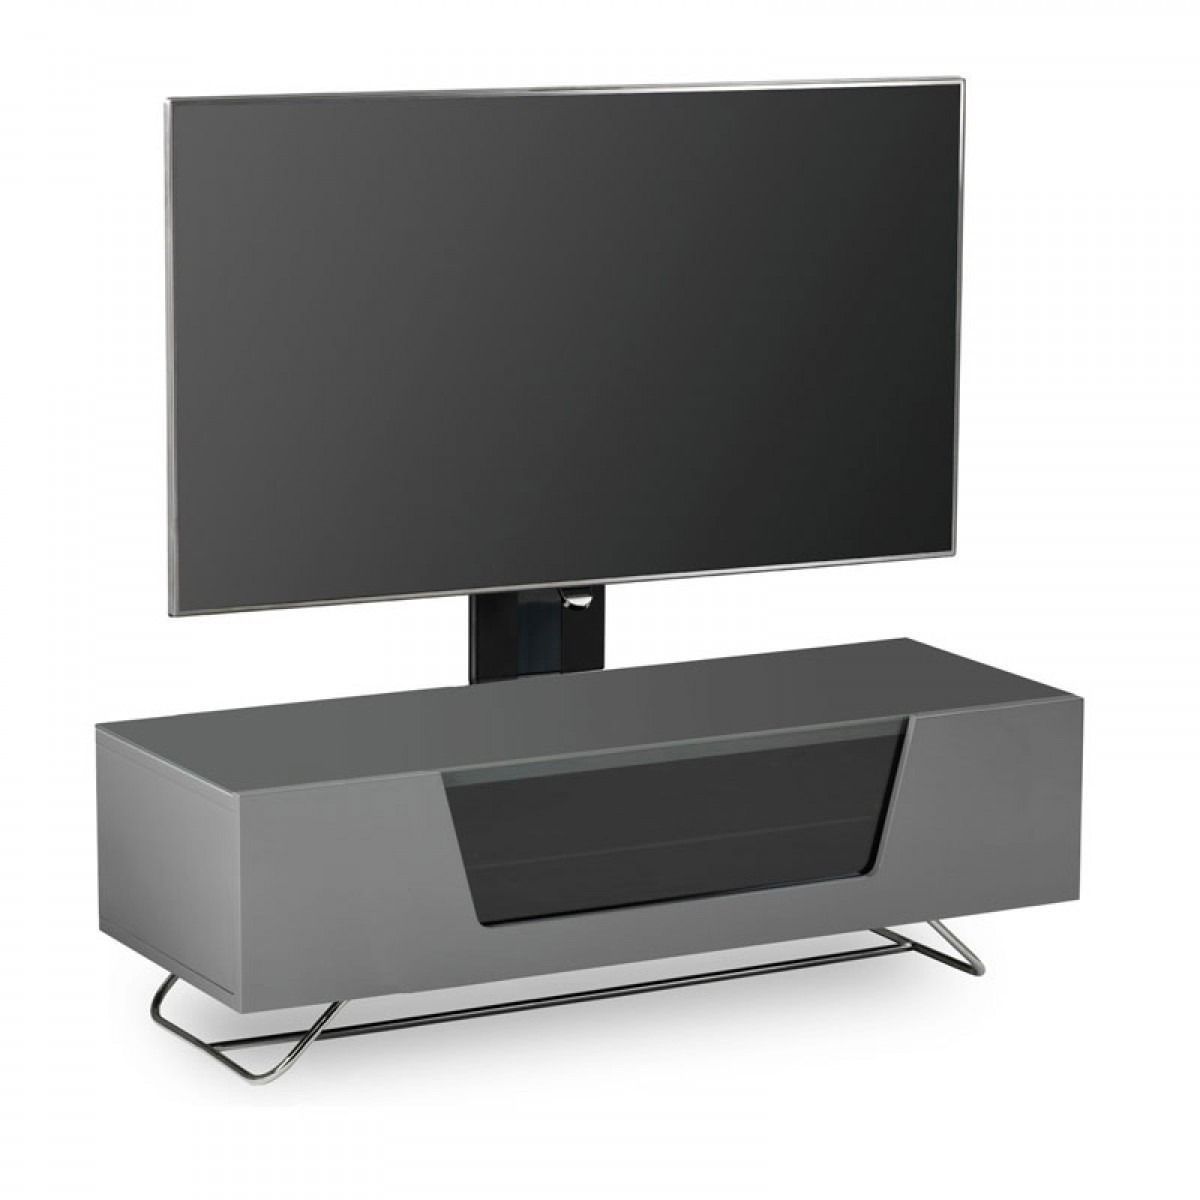 Chromium 2 100cm Cantilever Tv Stand In Grey For 50 Throughout Cantilever Glass Tv Stand (View 15 of 15)